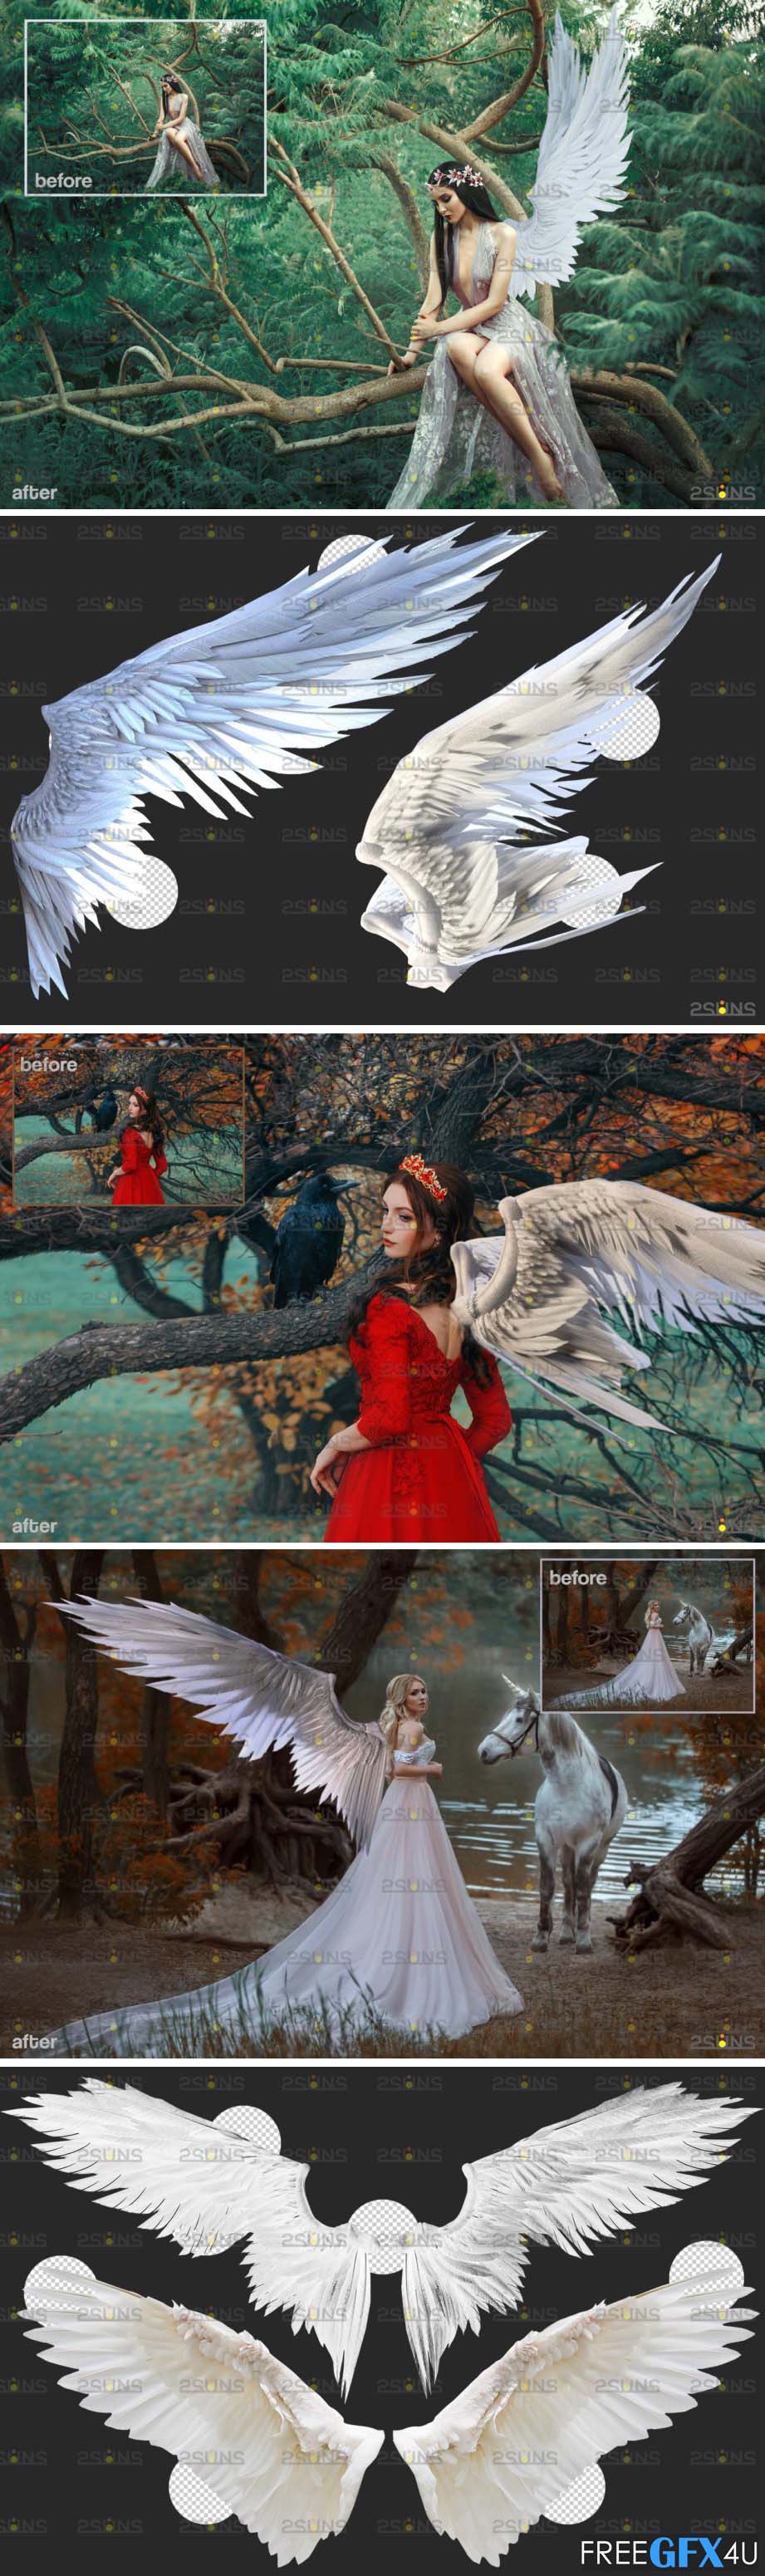 Realistic White Angel Wings Photoshop